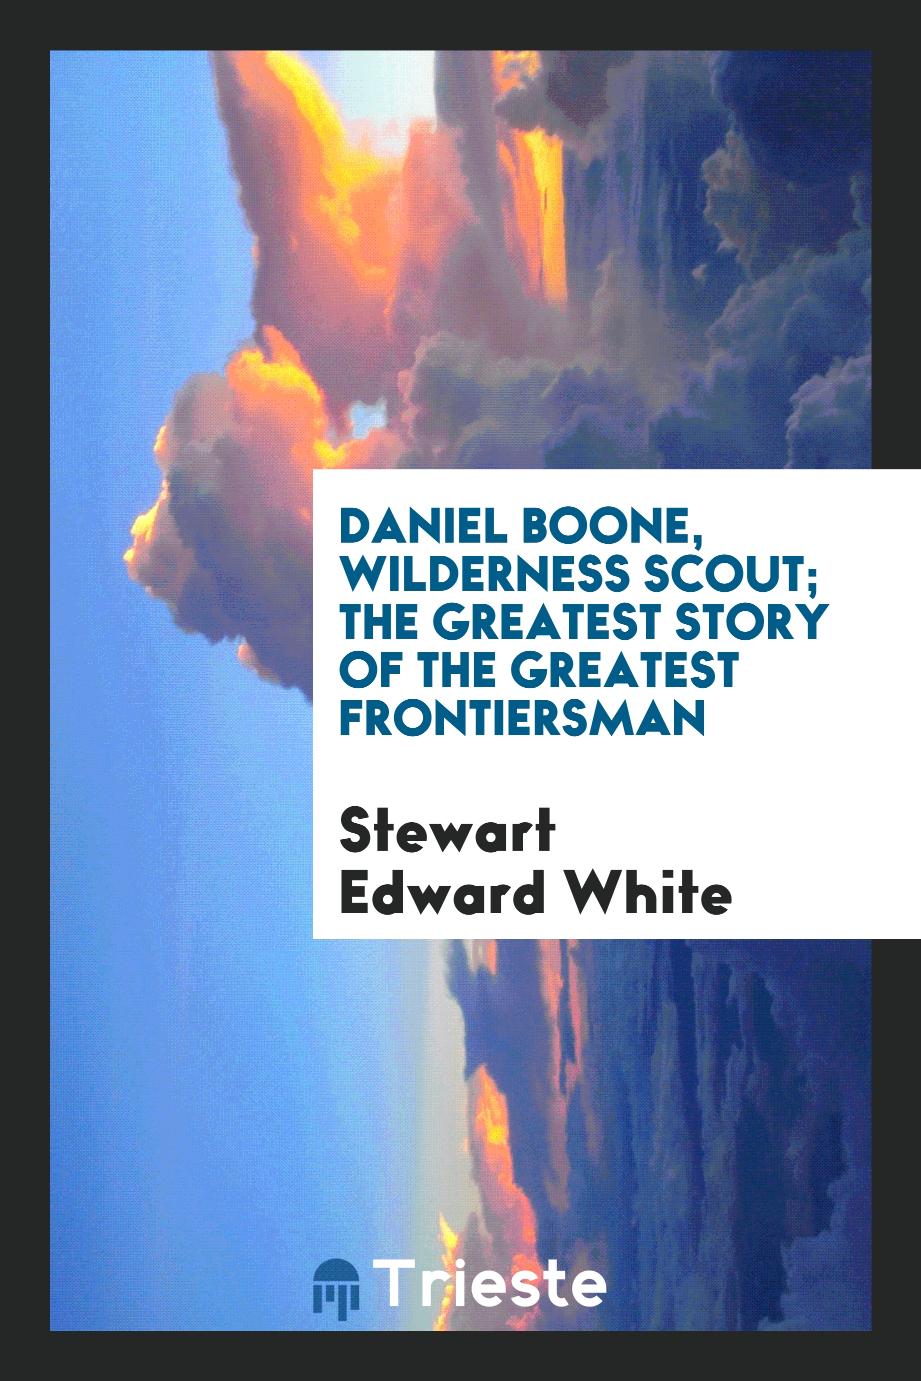 Daniel Boone, Wilderness Scout; The Greatest Story of the Greatest Frontiersman